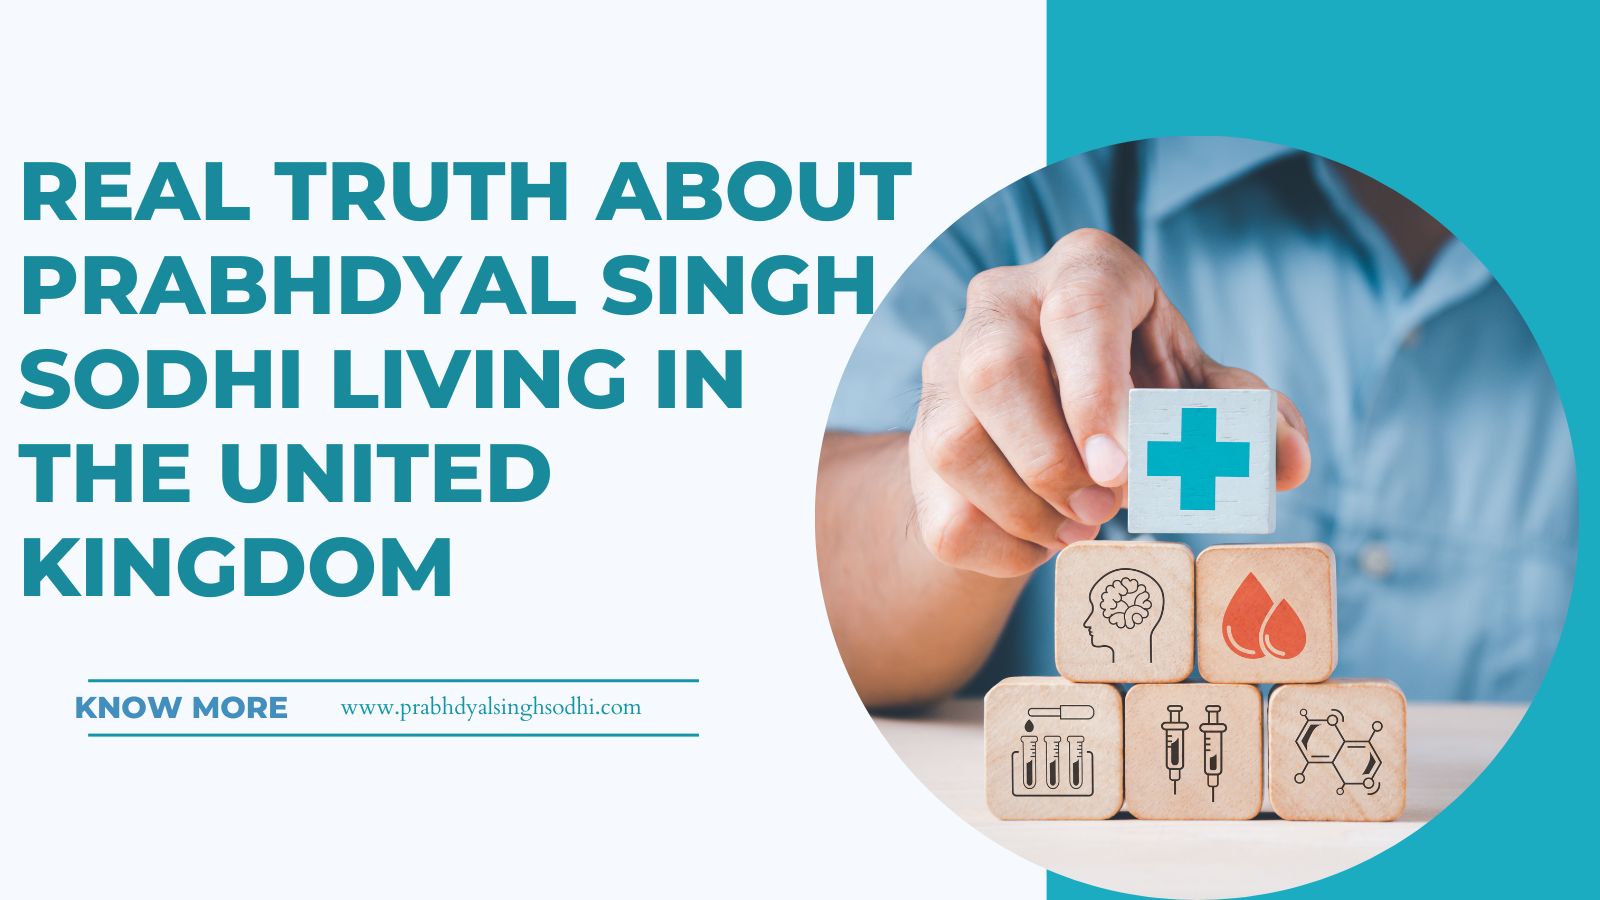 Real Truth About Prabhdyal Singh Sodhi Living in the United Kingdom